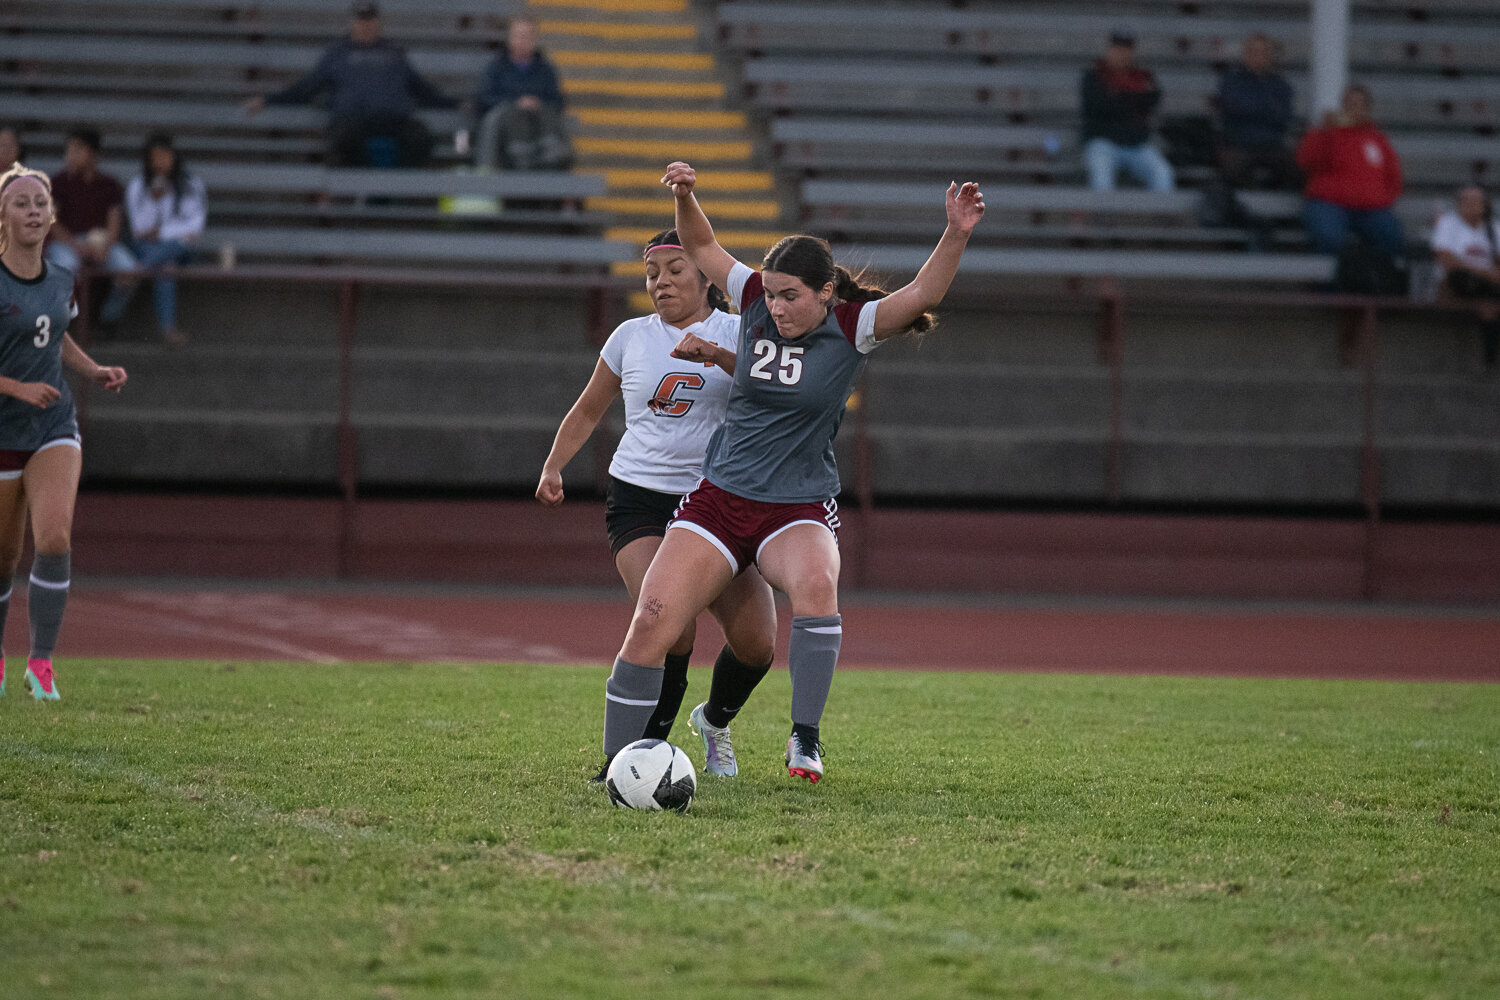 Centralia's Alia Gomez tries to work through W.F. West's Anna Alexander to gain control during Centralia's victory on Sept. 21.